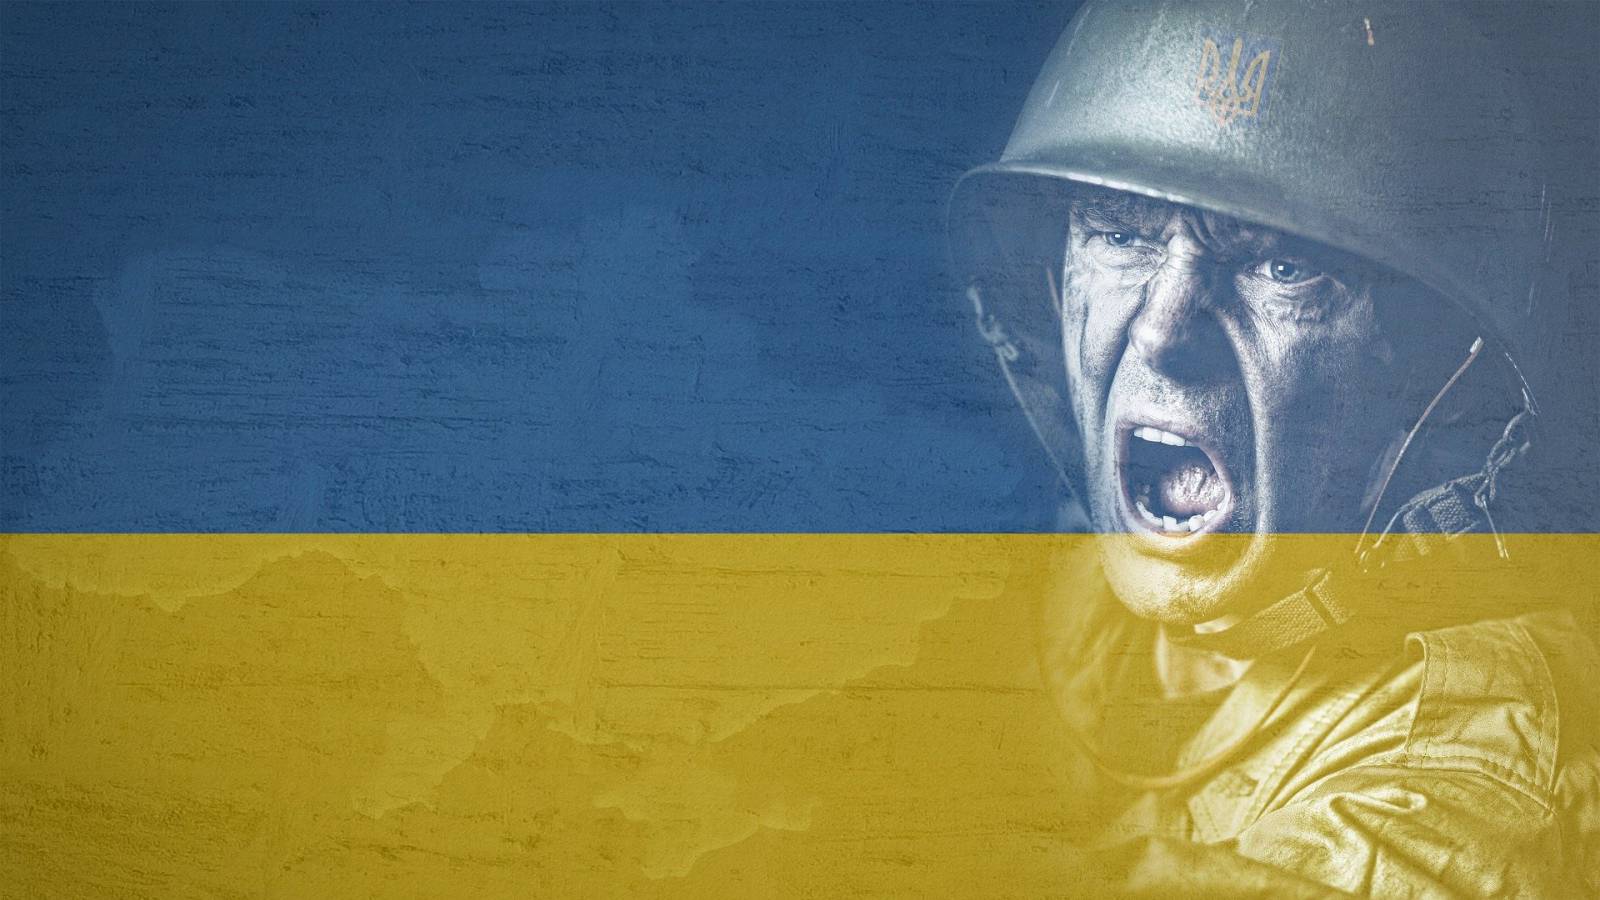 Russia will launch a New Powerful Offensive in the Donbas Region